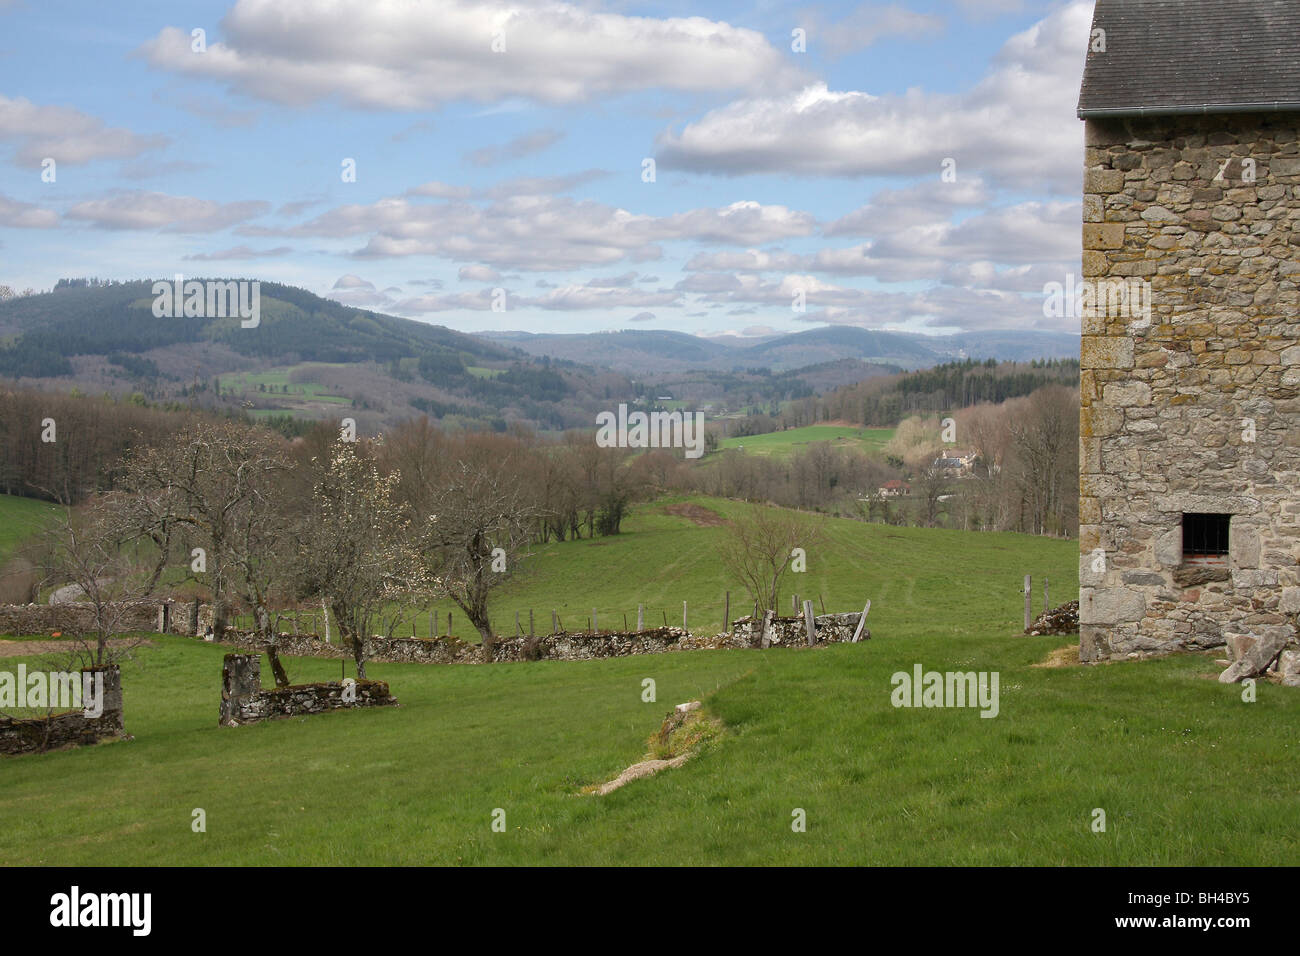 View over the hilly Limousin landscape with a small orchard and building in early spring. Stock Photo